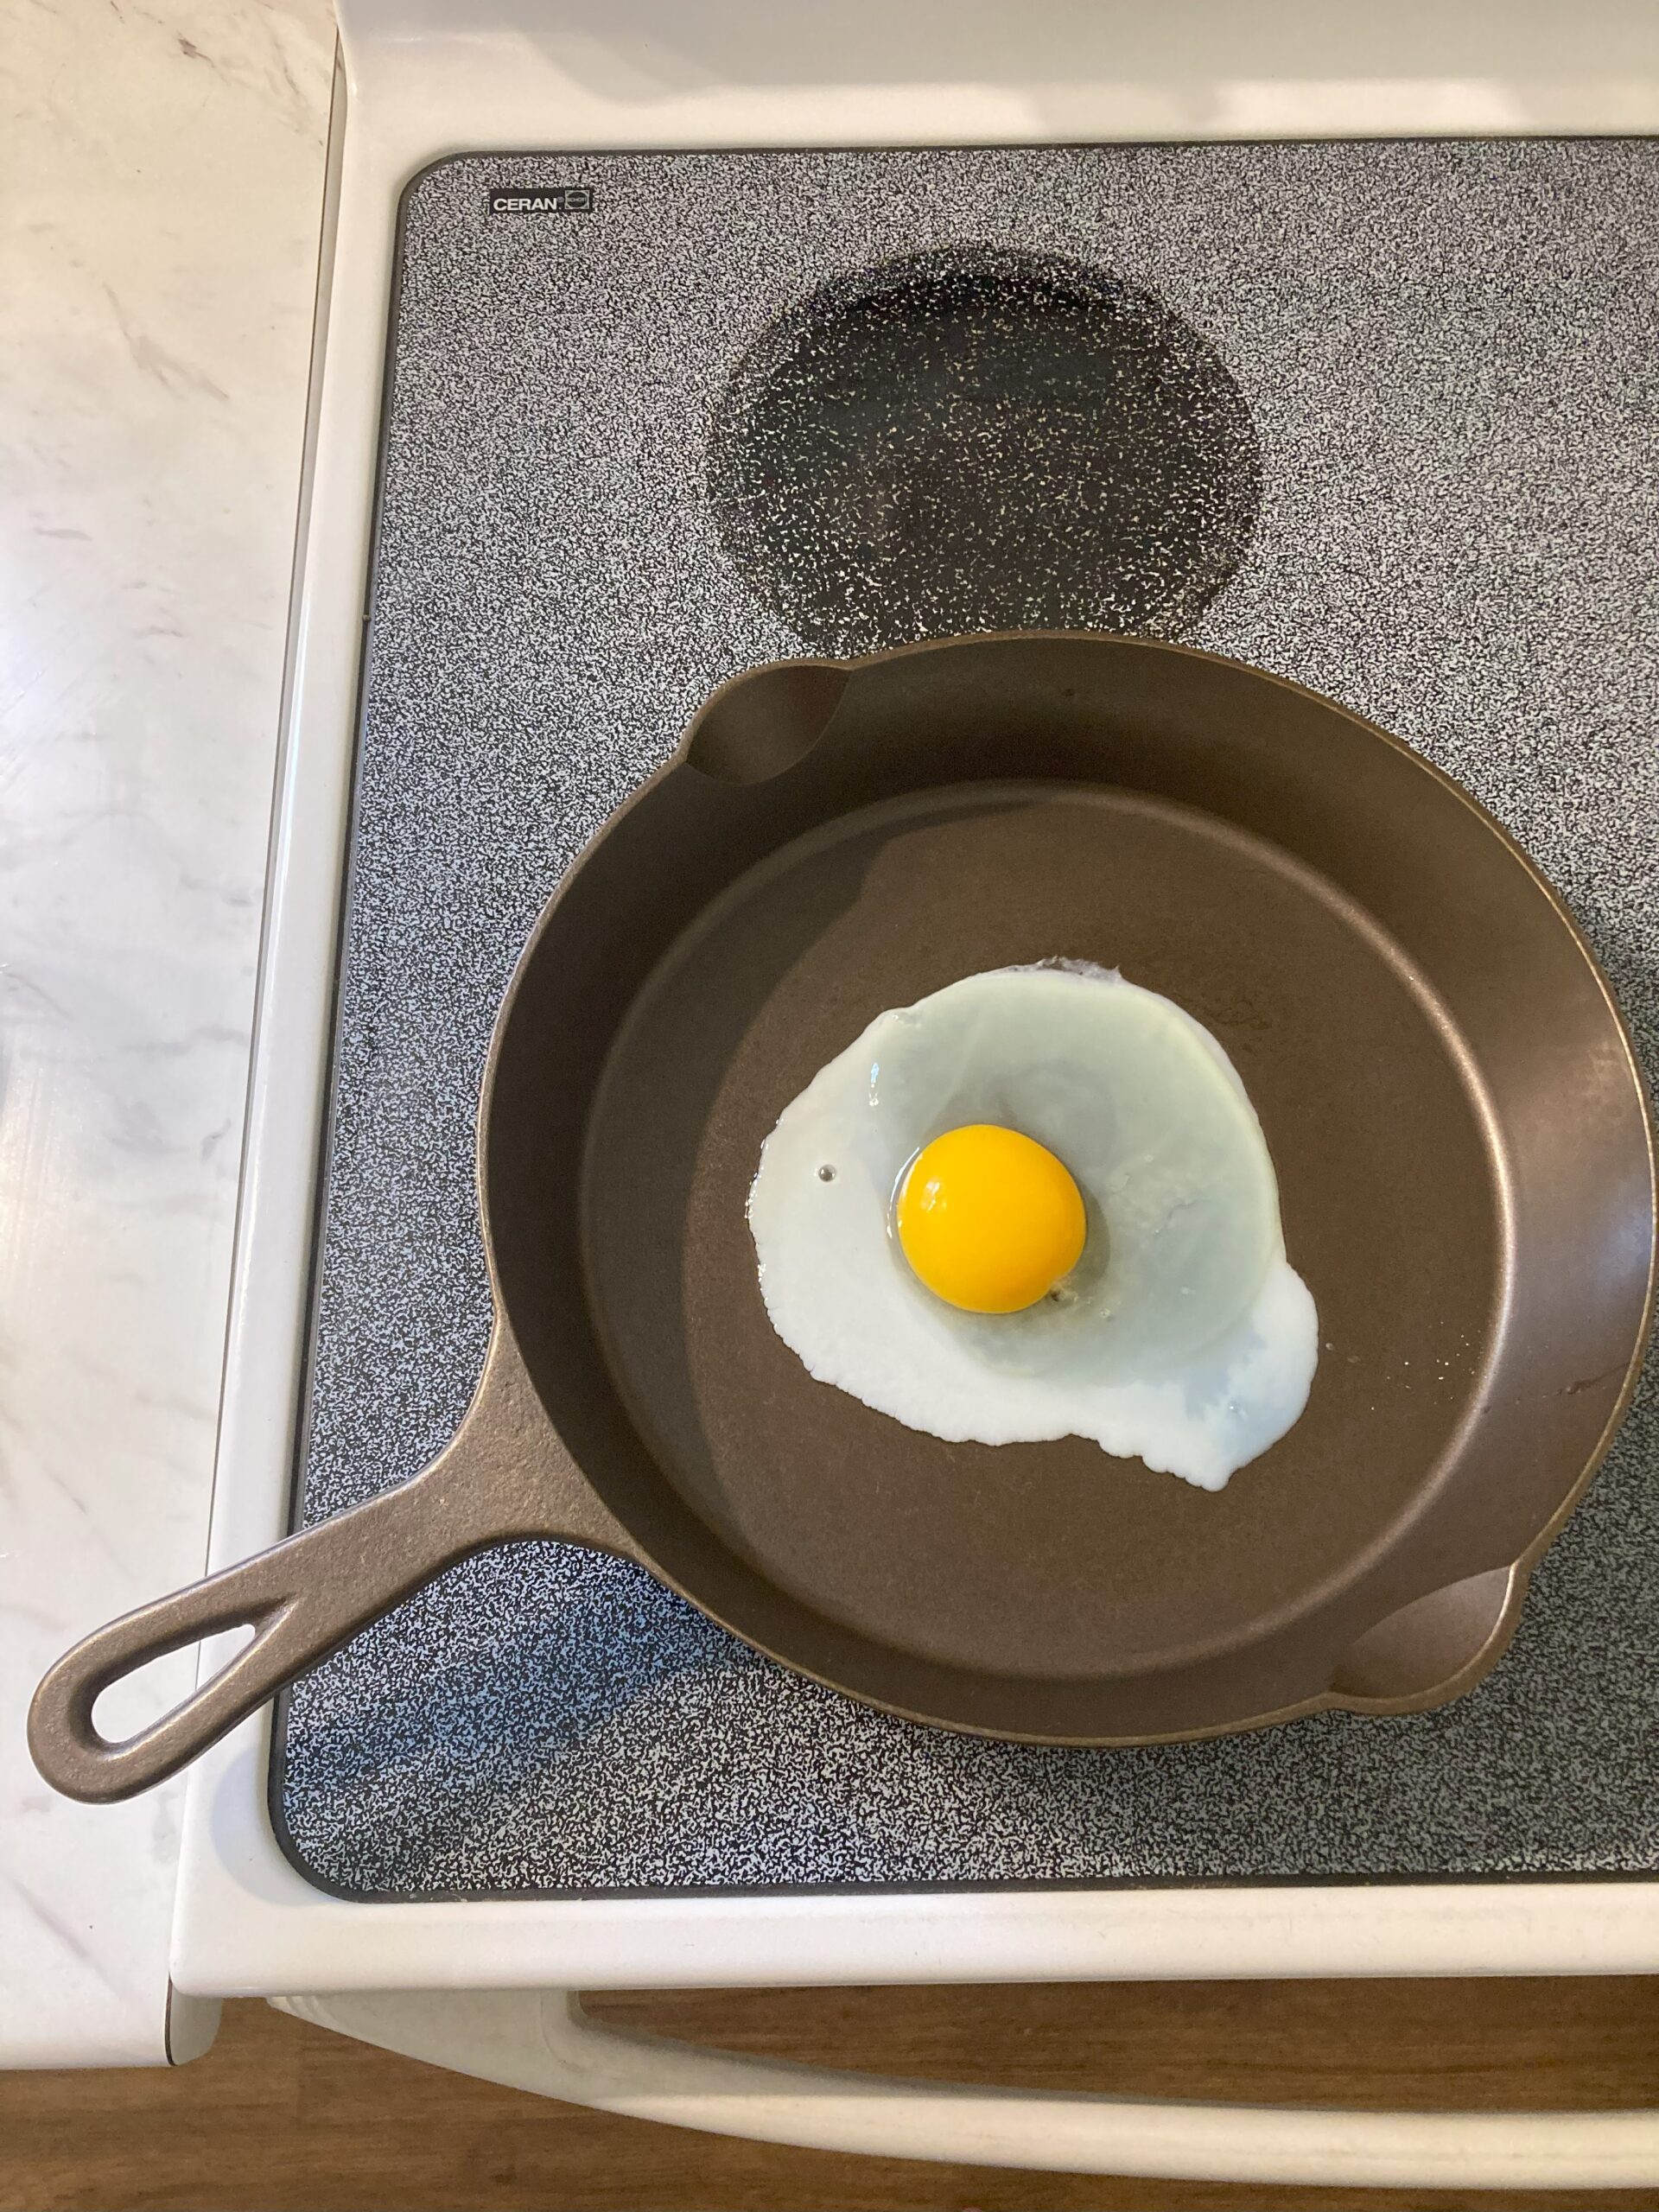 Lancaster Cast Iron Cookware Review: Is It Worth the Price? - LeafScore